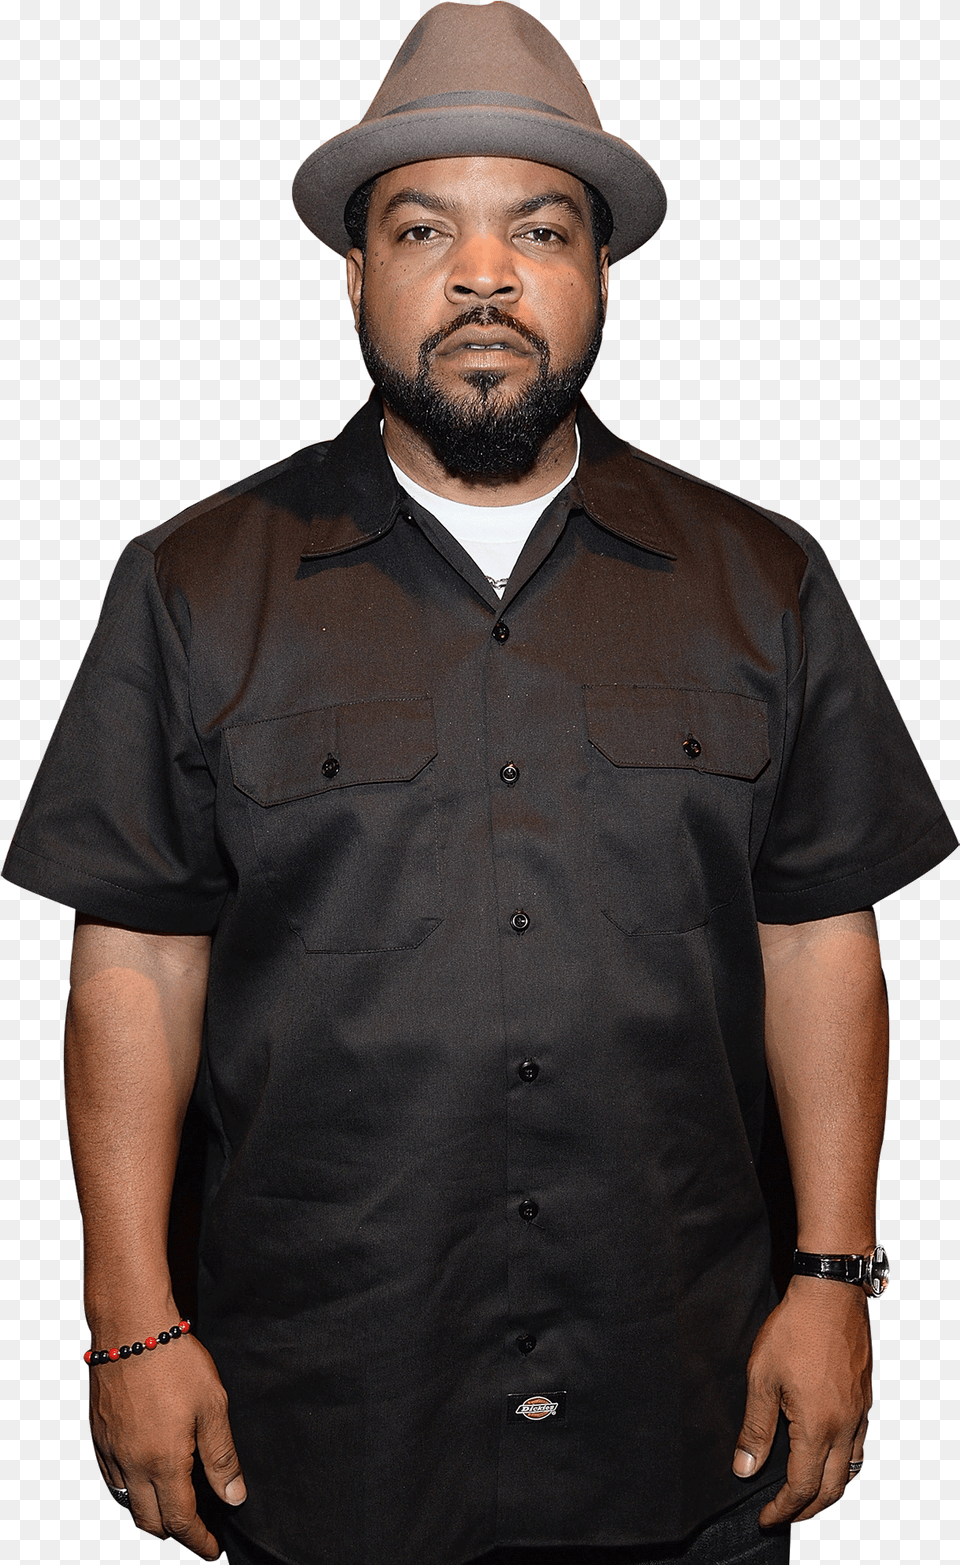 Ice Cube On 22 Jump Street Friday And Nwa Vulture Rapper Ice Cube Rapper, Shirt, Clothing, Adult, Person Png